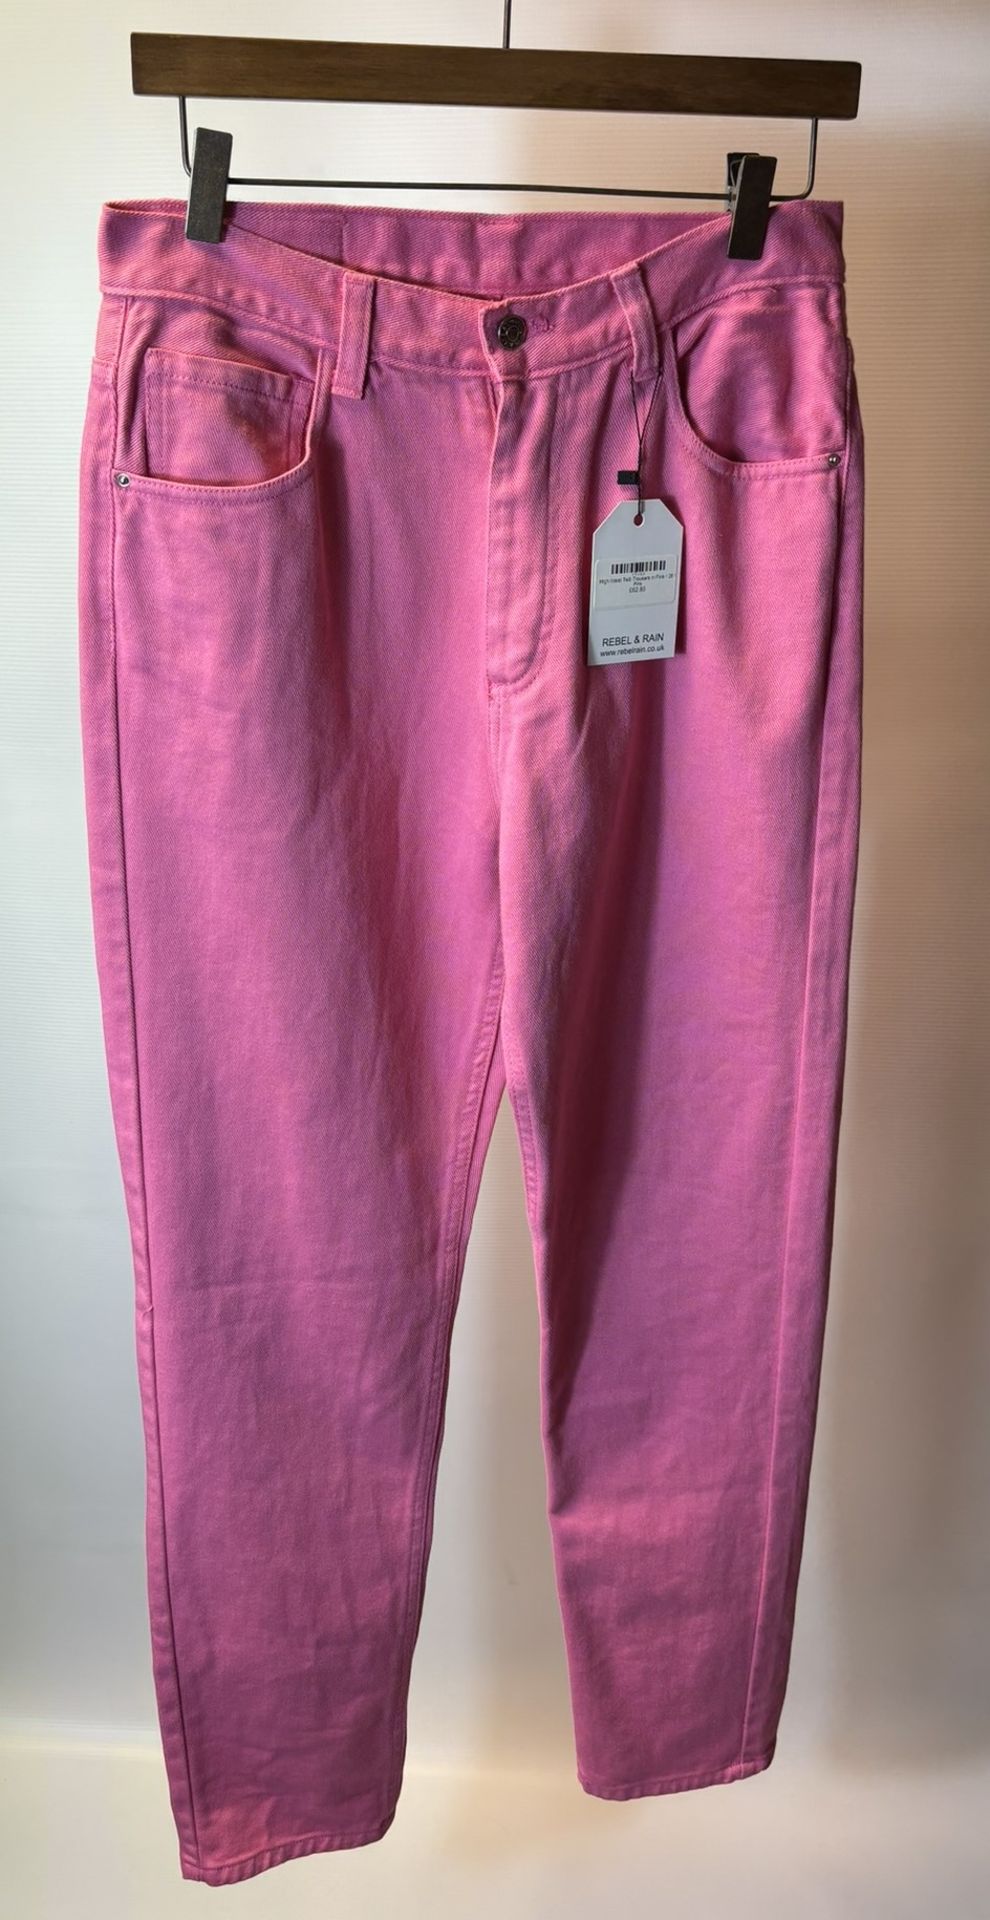 12 x Various Pairs Of Women's Trousers/Jeans As Seen In Photos - Bild 34 aus 36